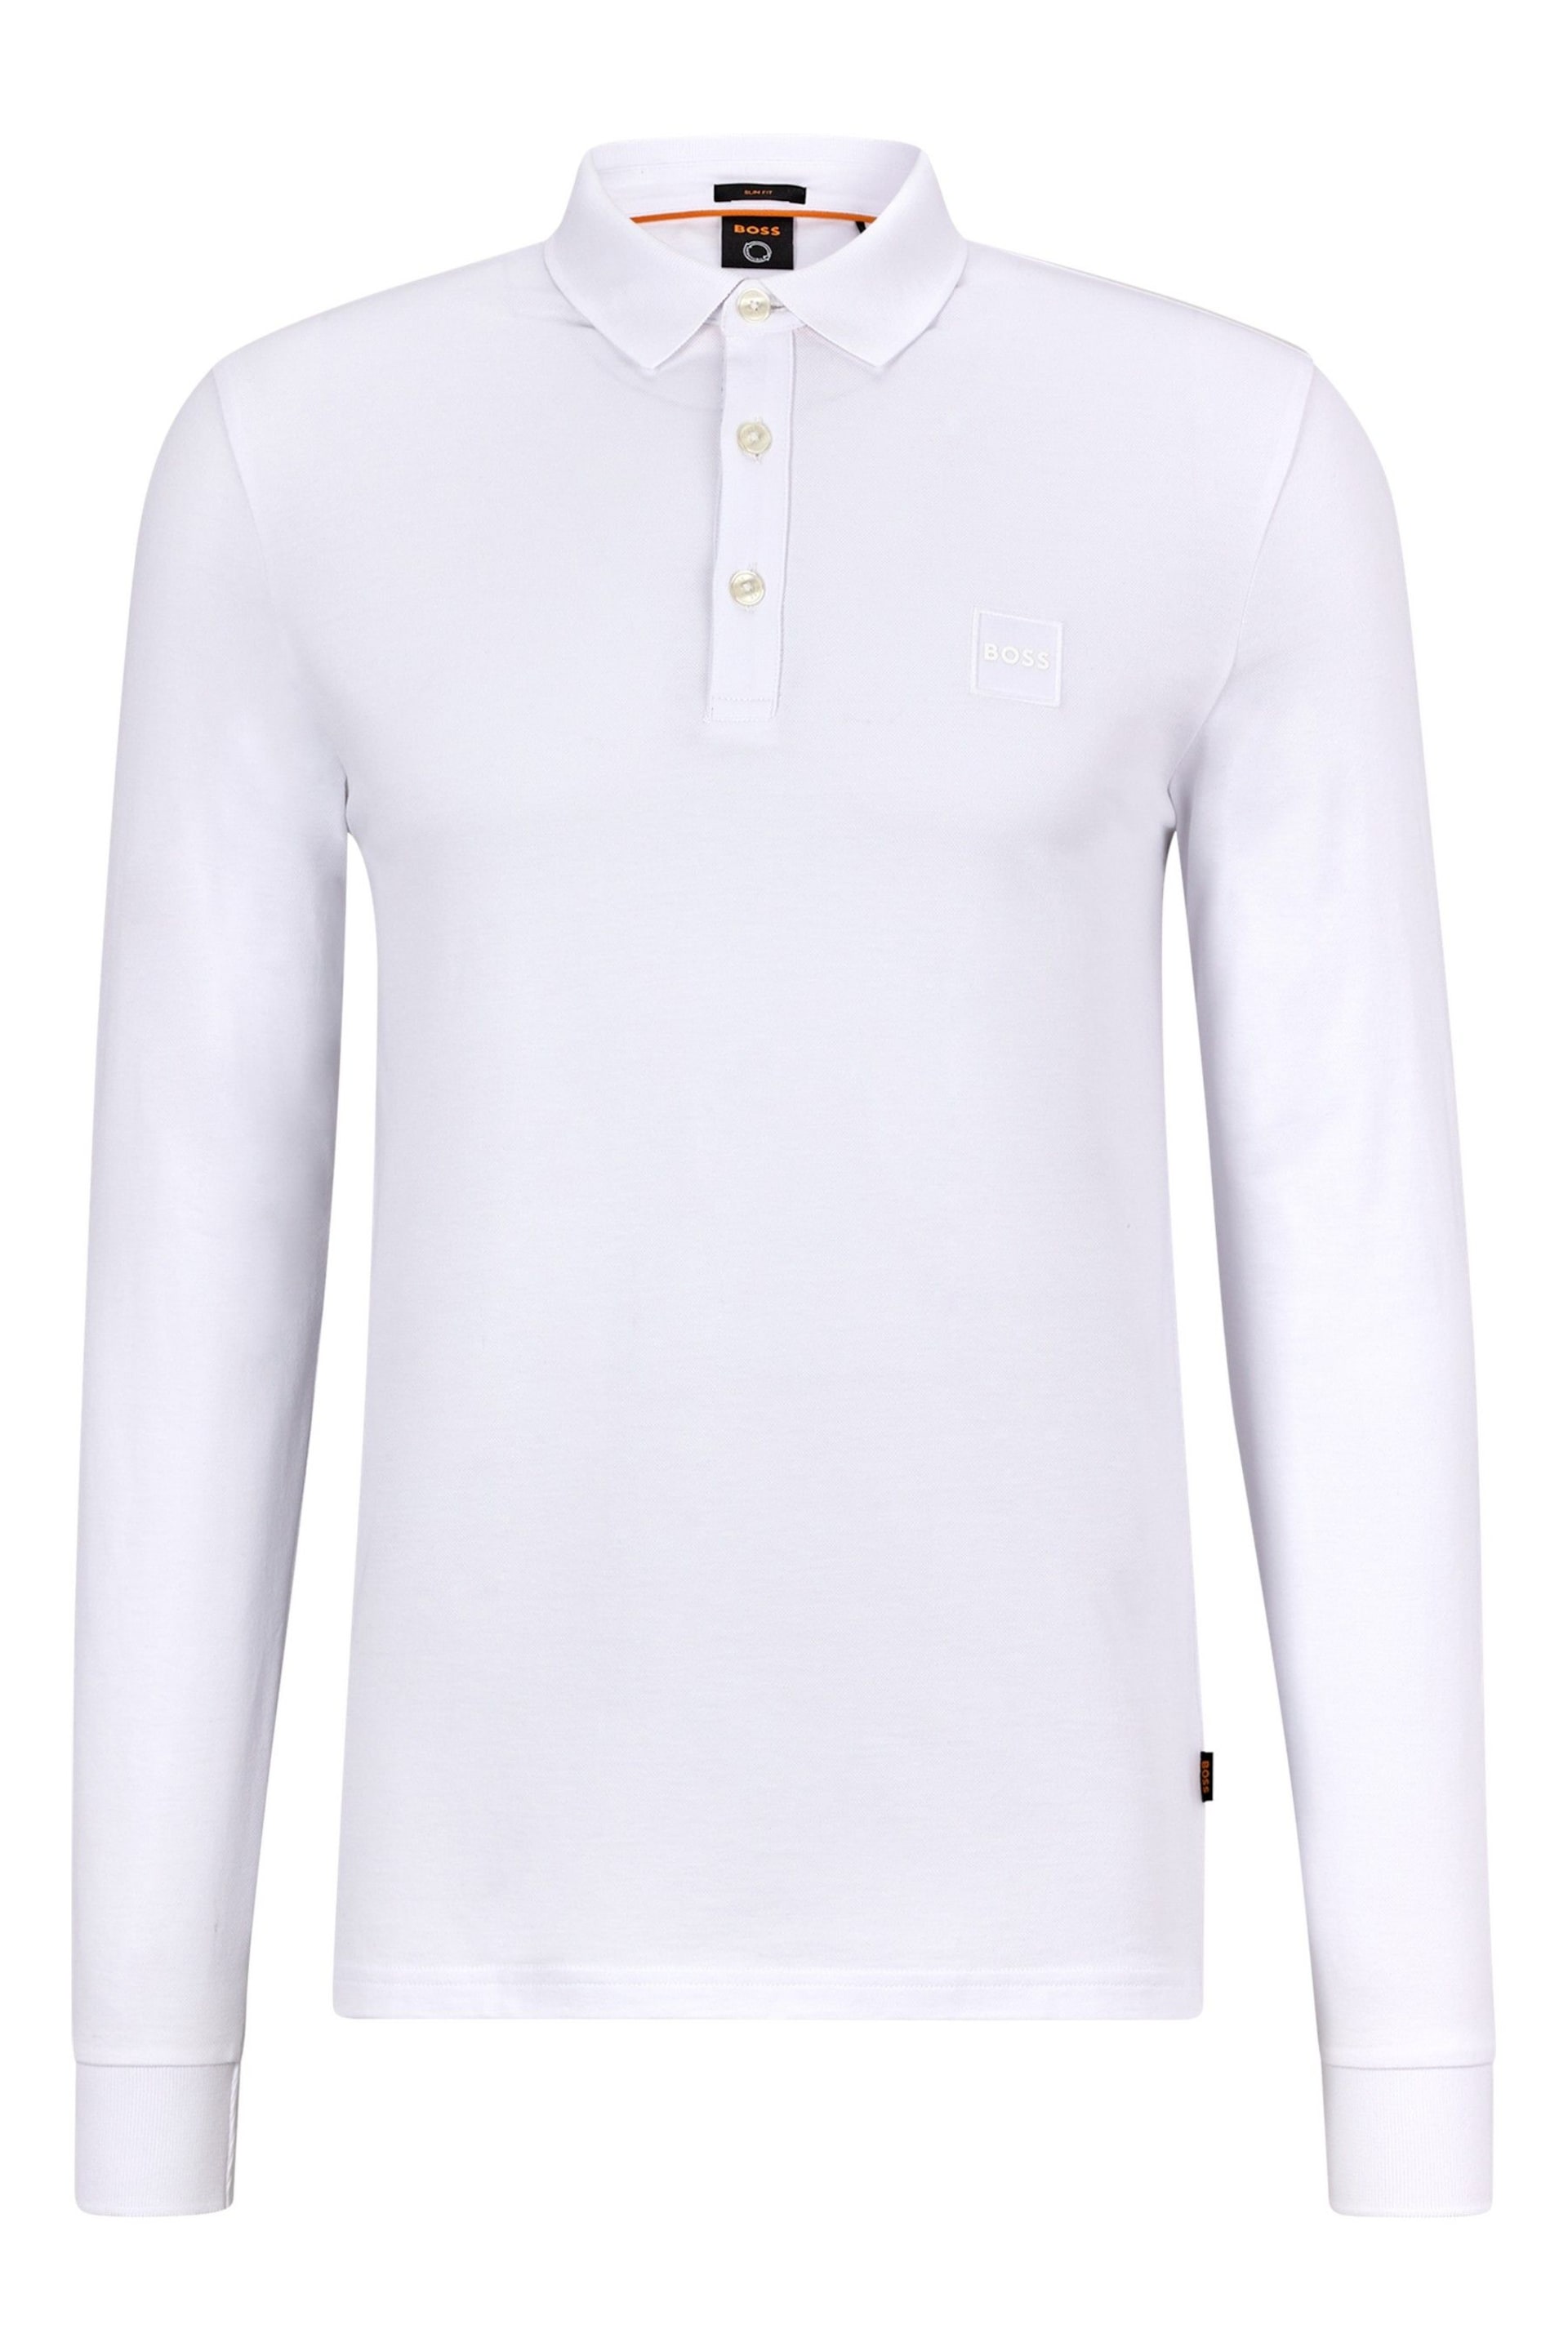 BOSS White Chrome Passerby Polo Shirt - Image 5 of 5